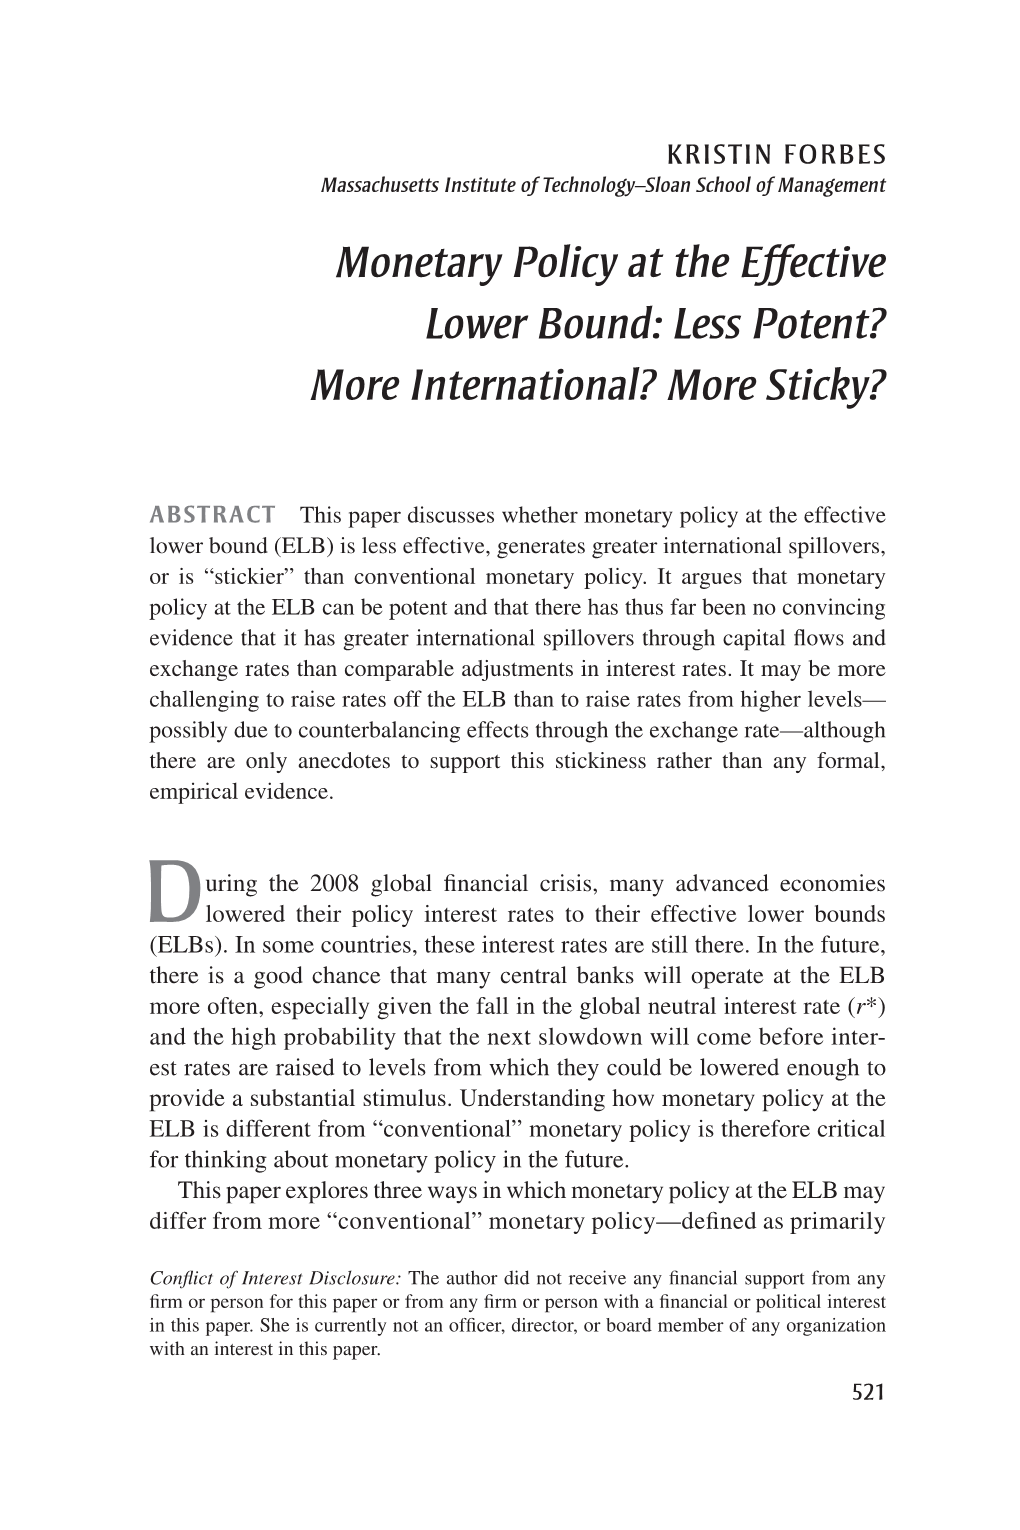 Monetary Policy at the Effective Lower Bound: Less Potent? More International? More Sticky?